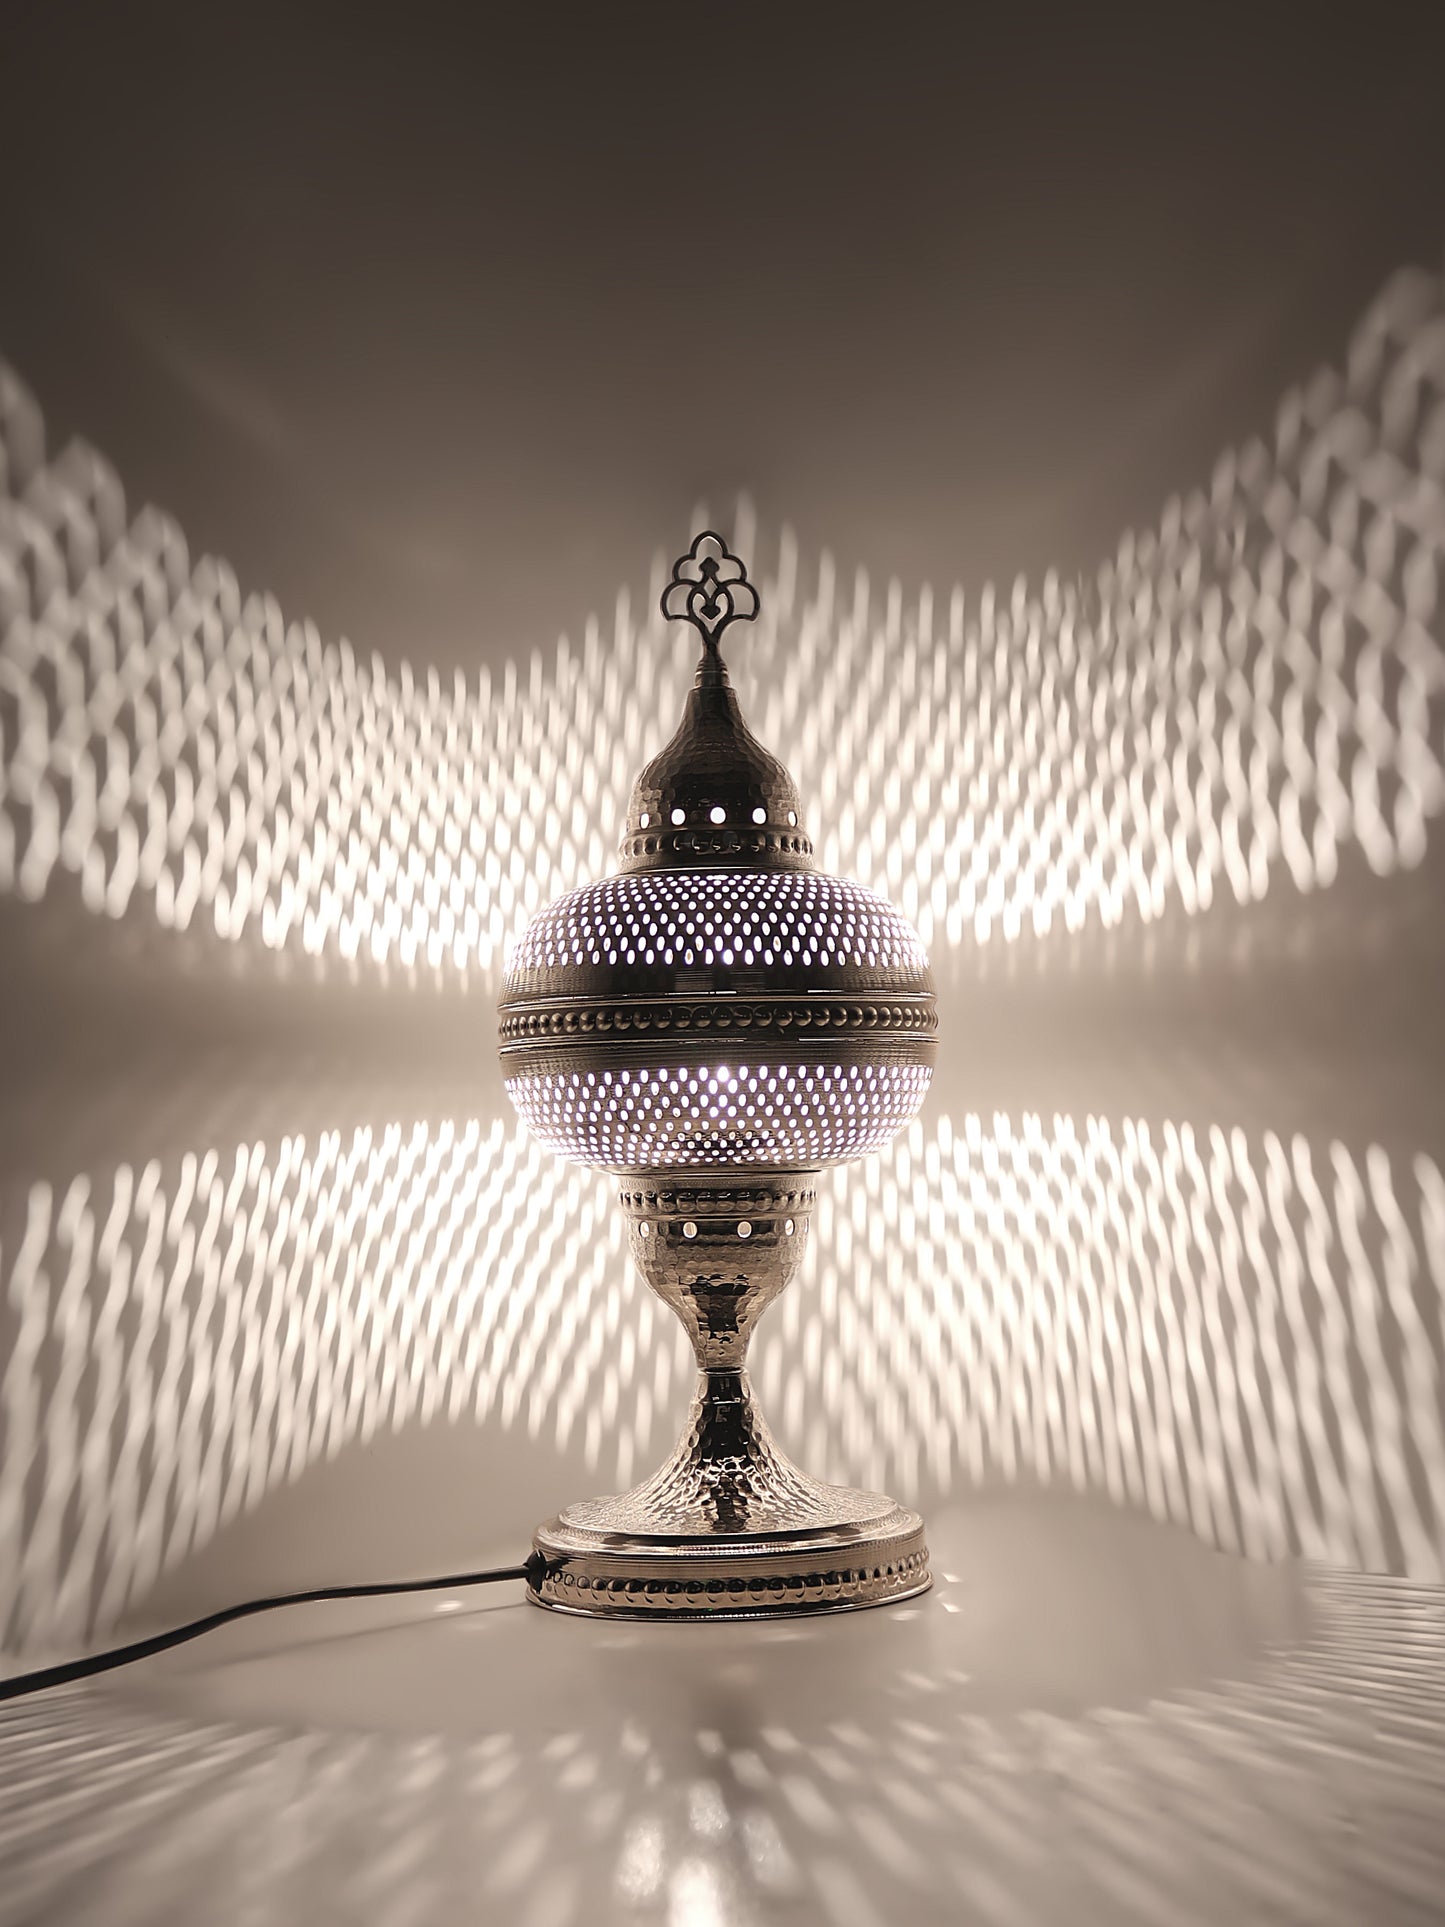 Turkish Pattern Moroccan Bedside Lamp Silver Color